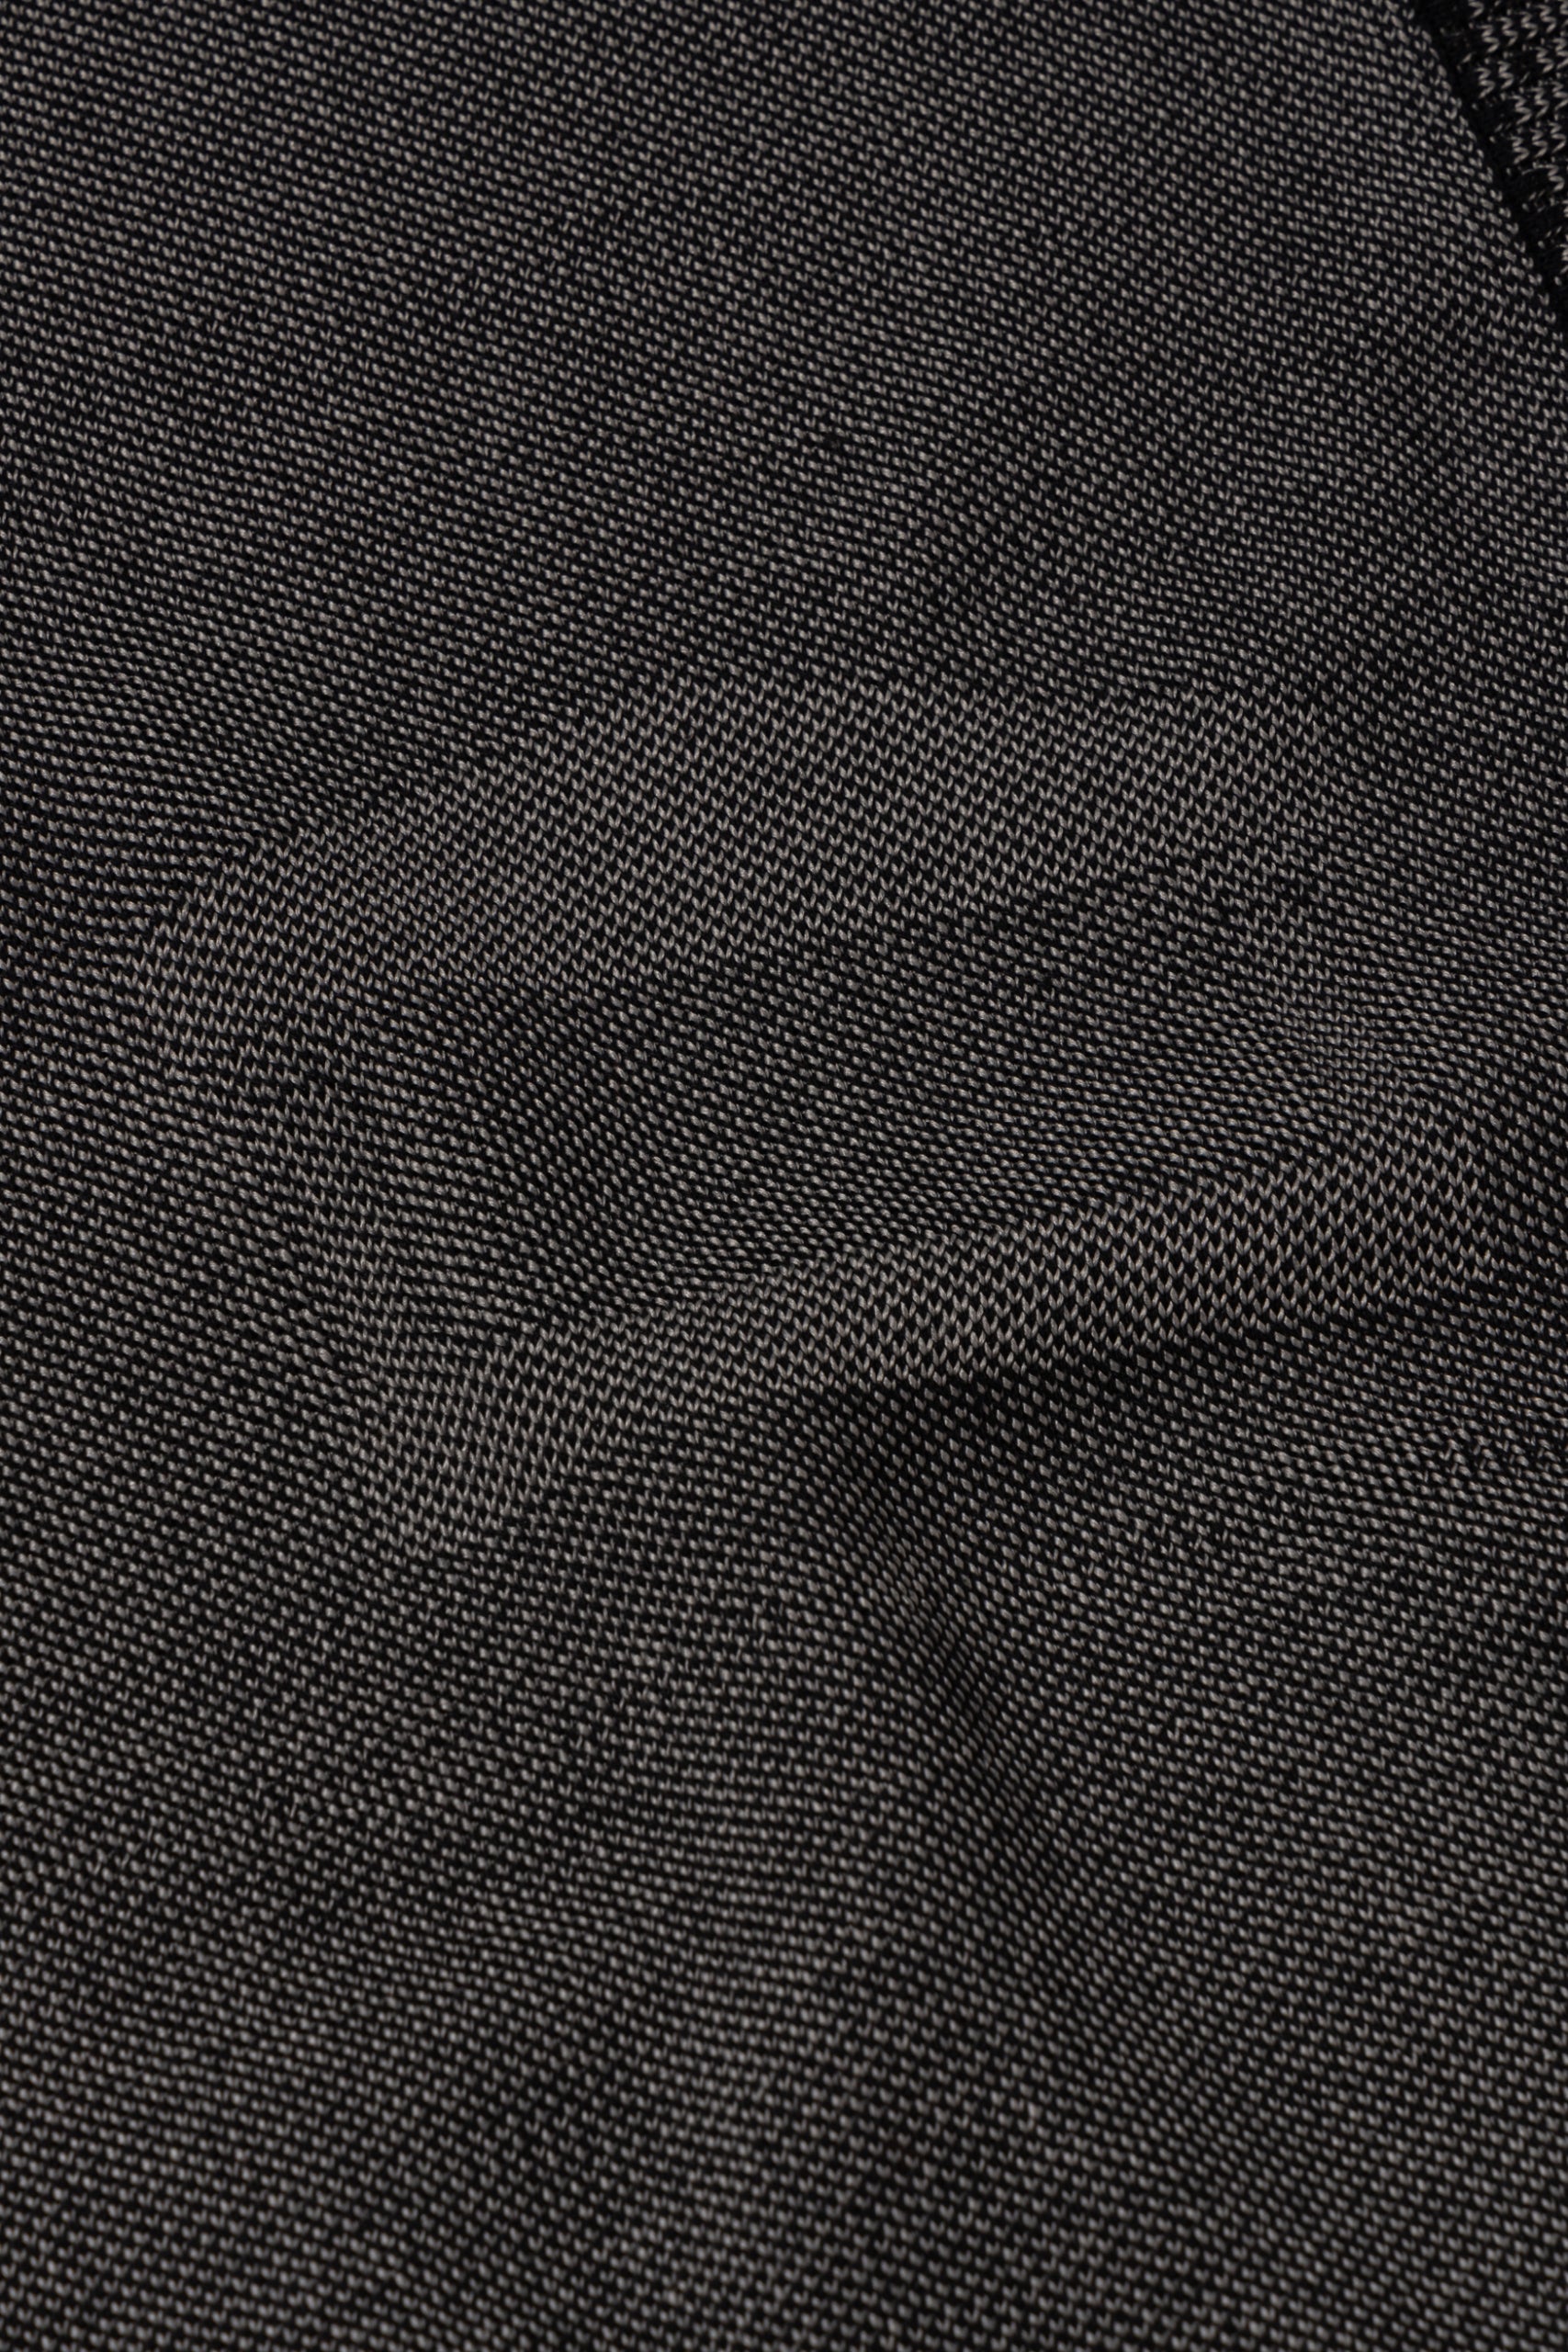 Load image into Gallery viewer, Glitch Temple Knit Vest